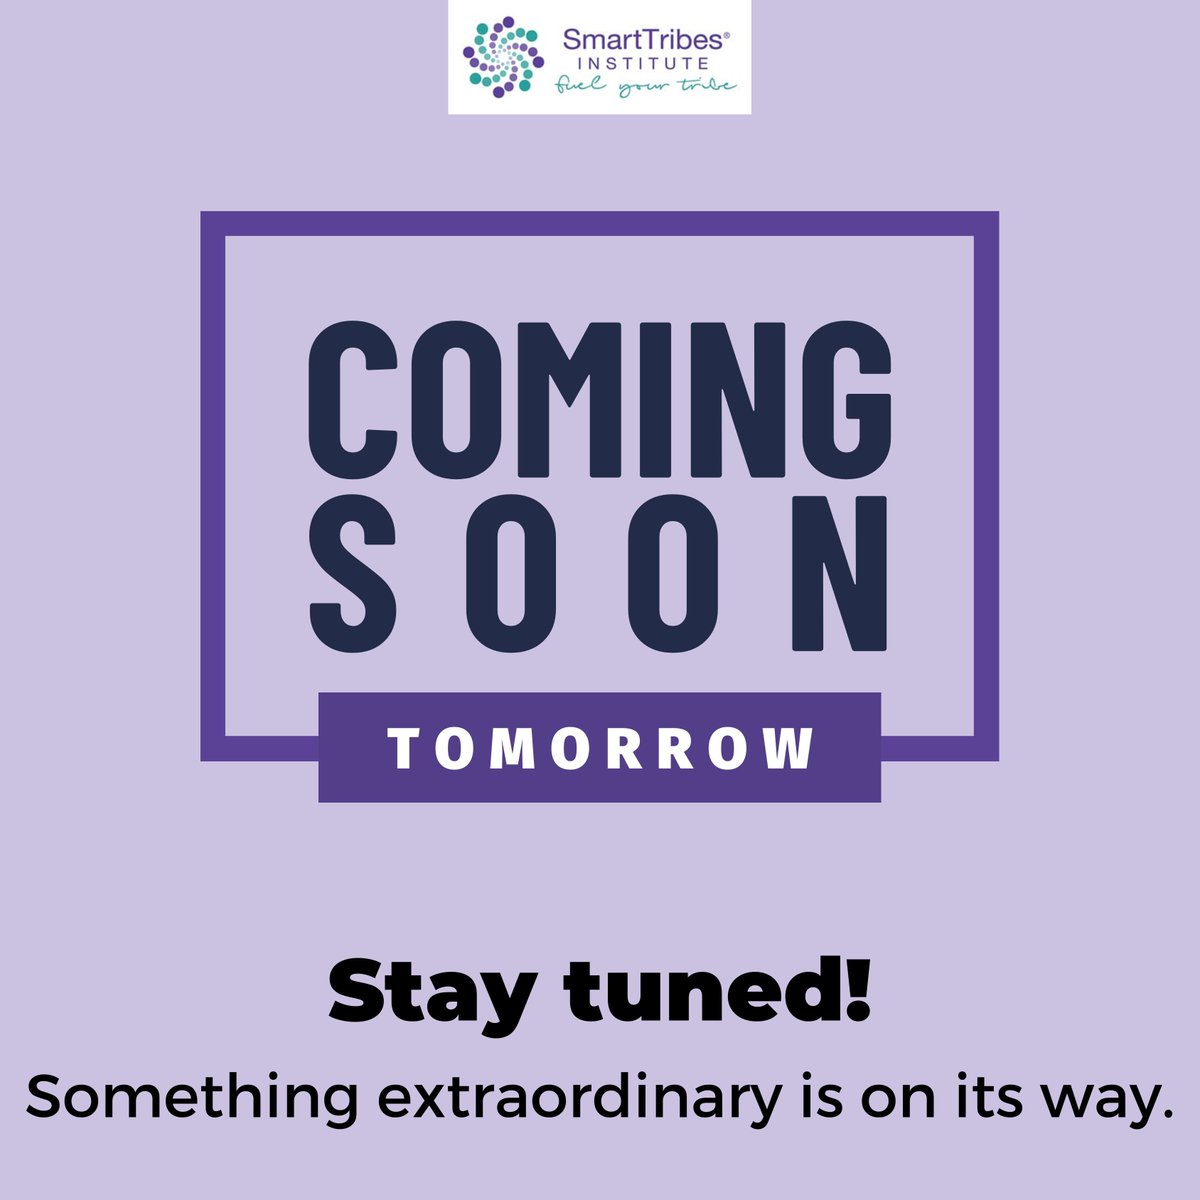 🌟 Exciting News Alert! 🌟 🚀 Brace yourselves, something cool is about to hit your inbox TOMORROW! 🔥 Want to be the first to know? Join our exclusive mailing list today 🎁 Plus, score a FREE gift just for signing up! 🎉 Click here to subscribe: buff.ly/3U3I5tv ✨